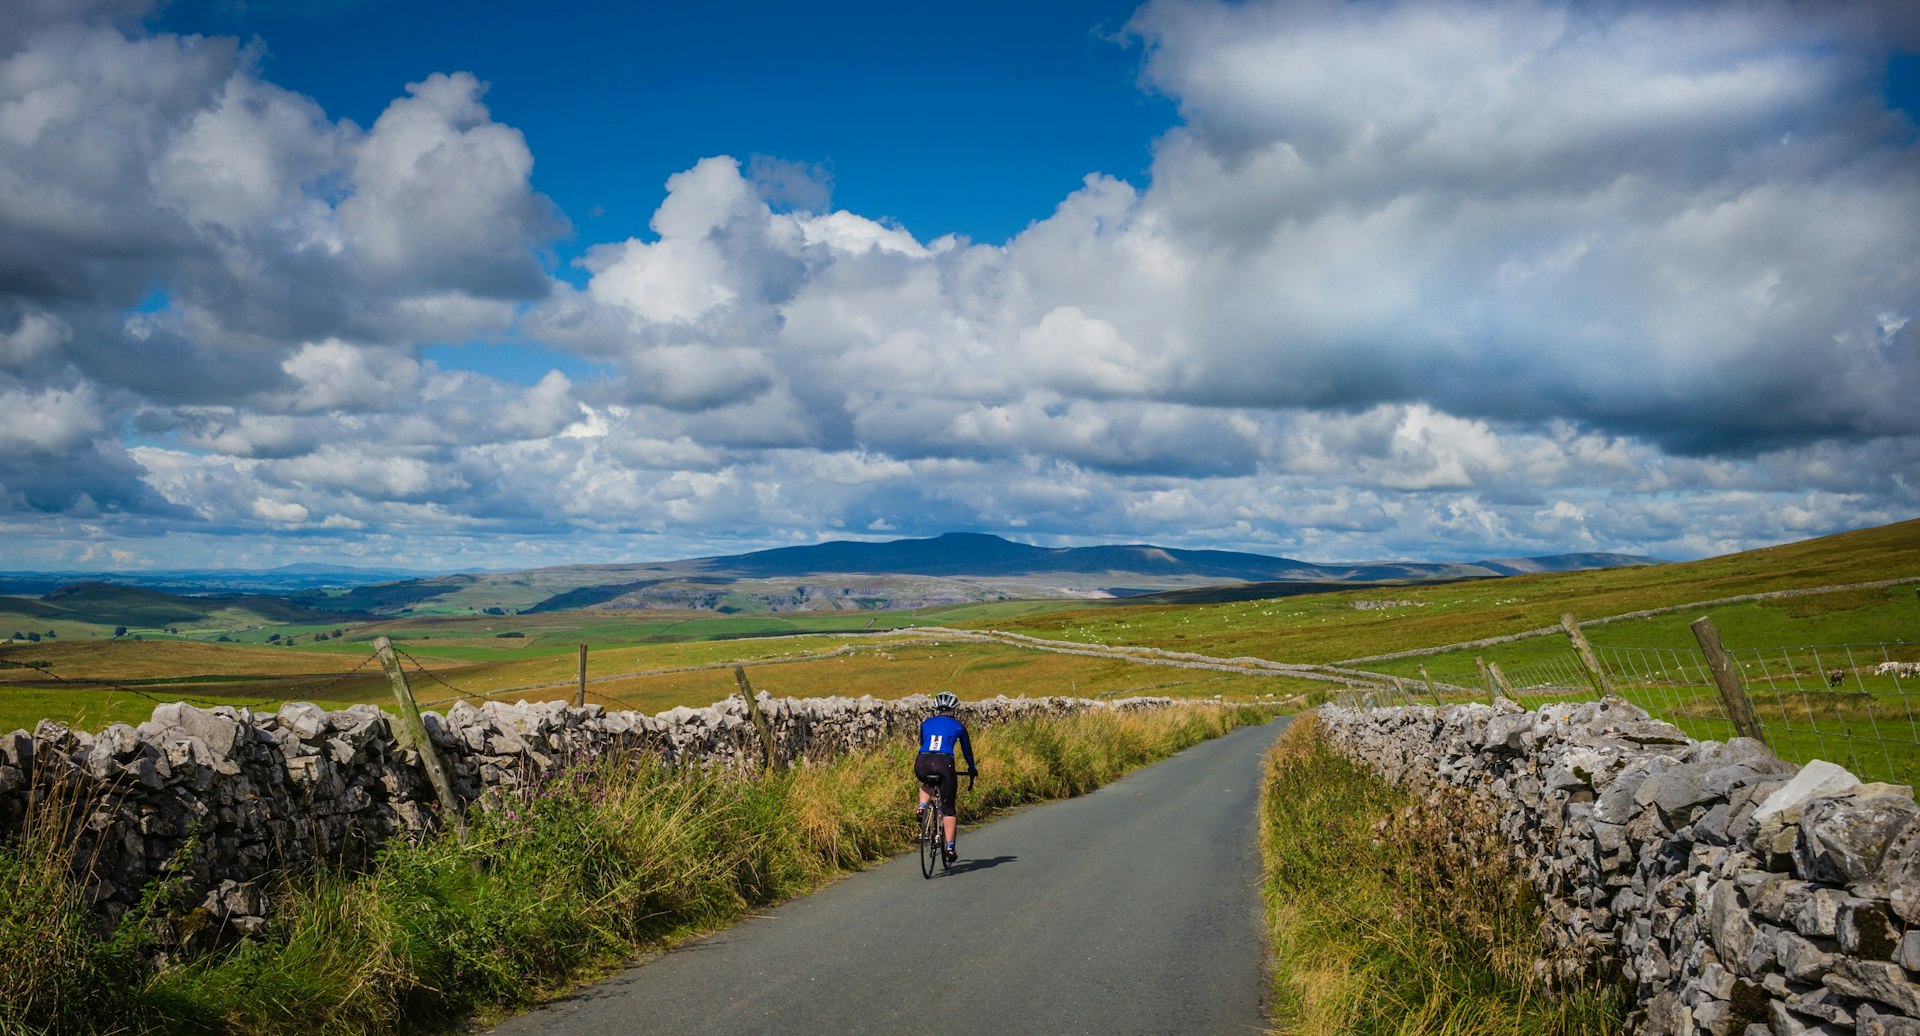 A lone cyclist pedals along a narrow stretch of road lined by old stone walls; the road meanders into the distant hills.